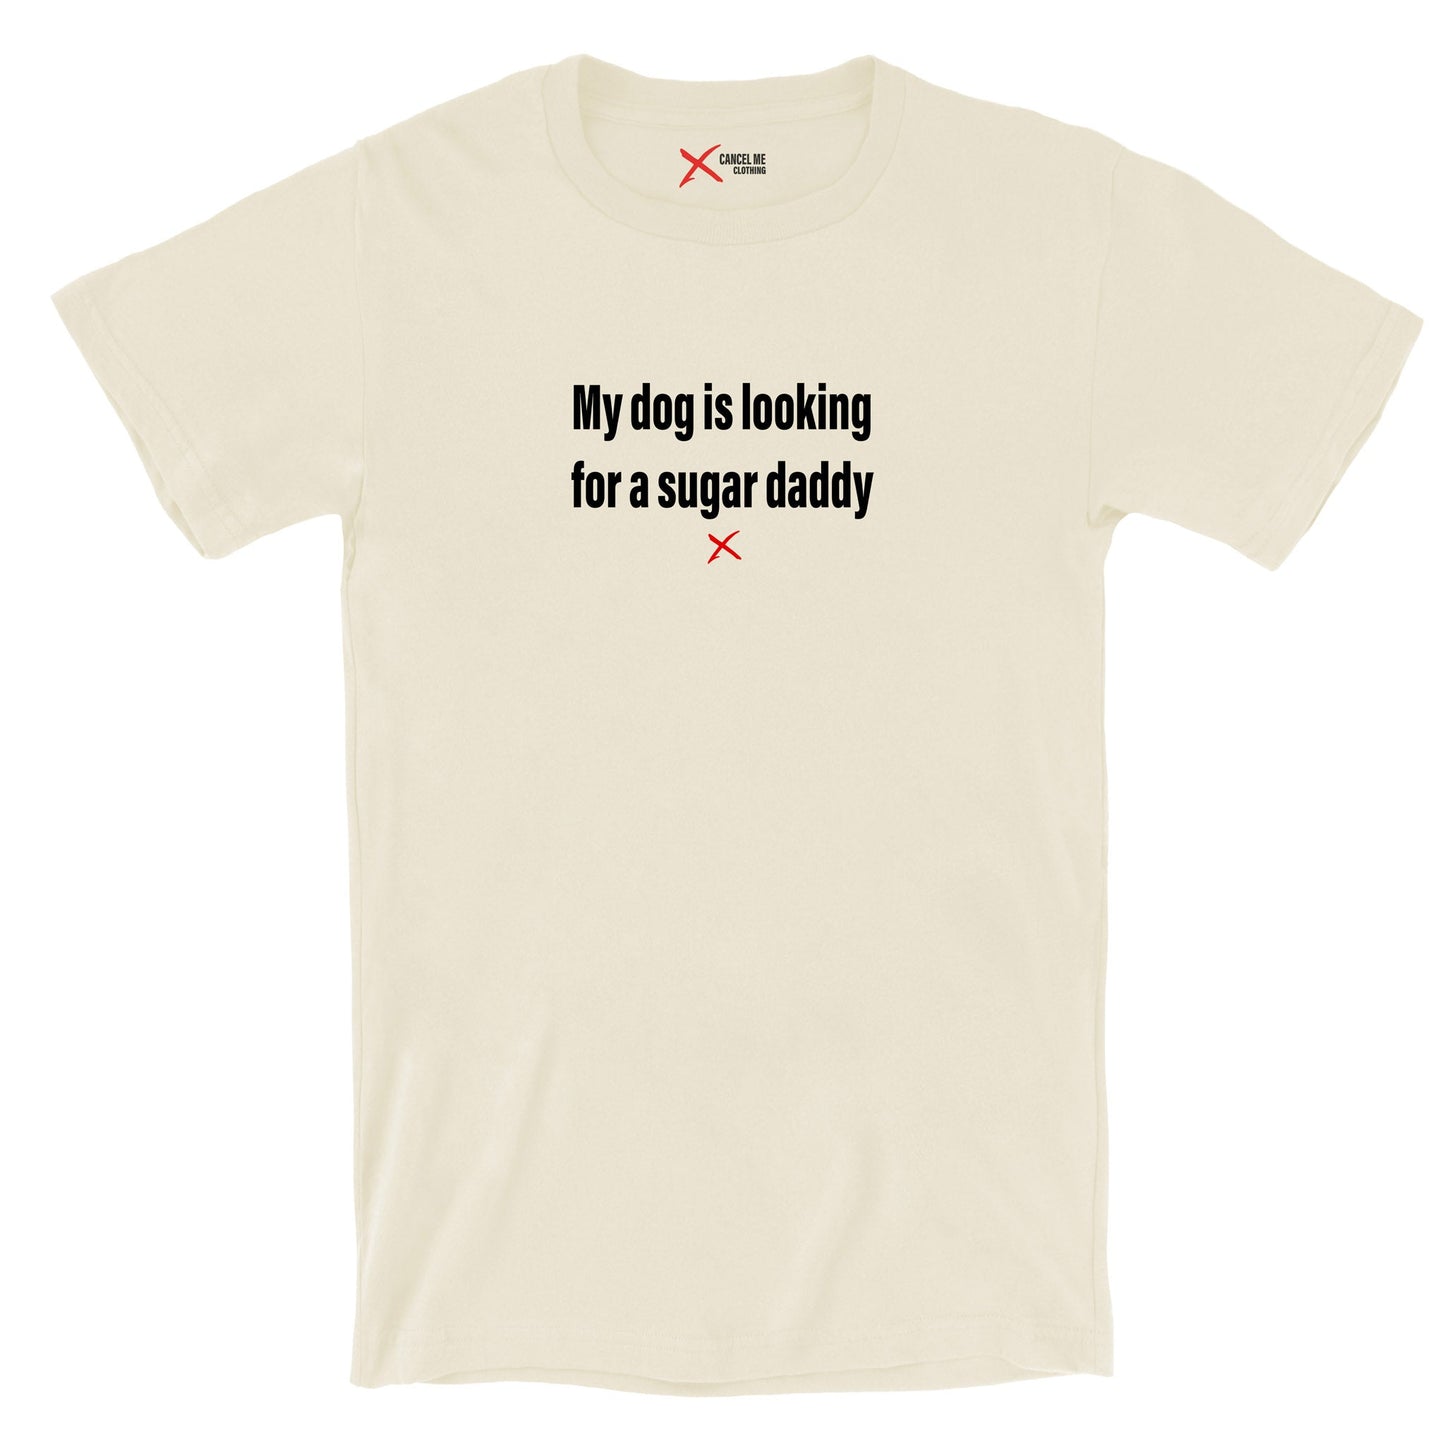 My dog is looking for a sugar daddy - Shirt